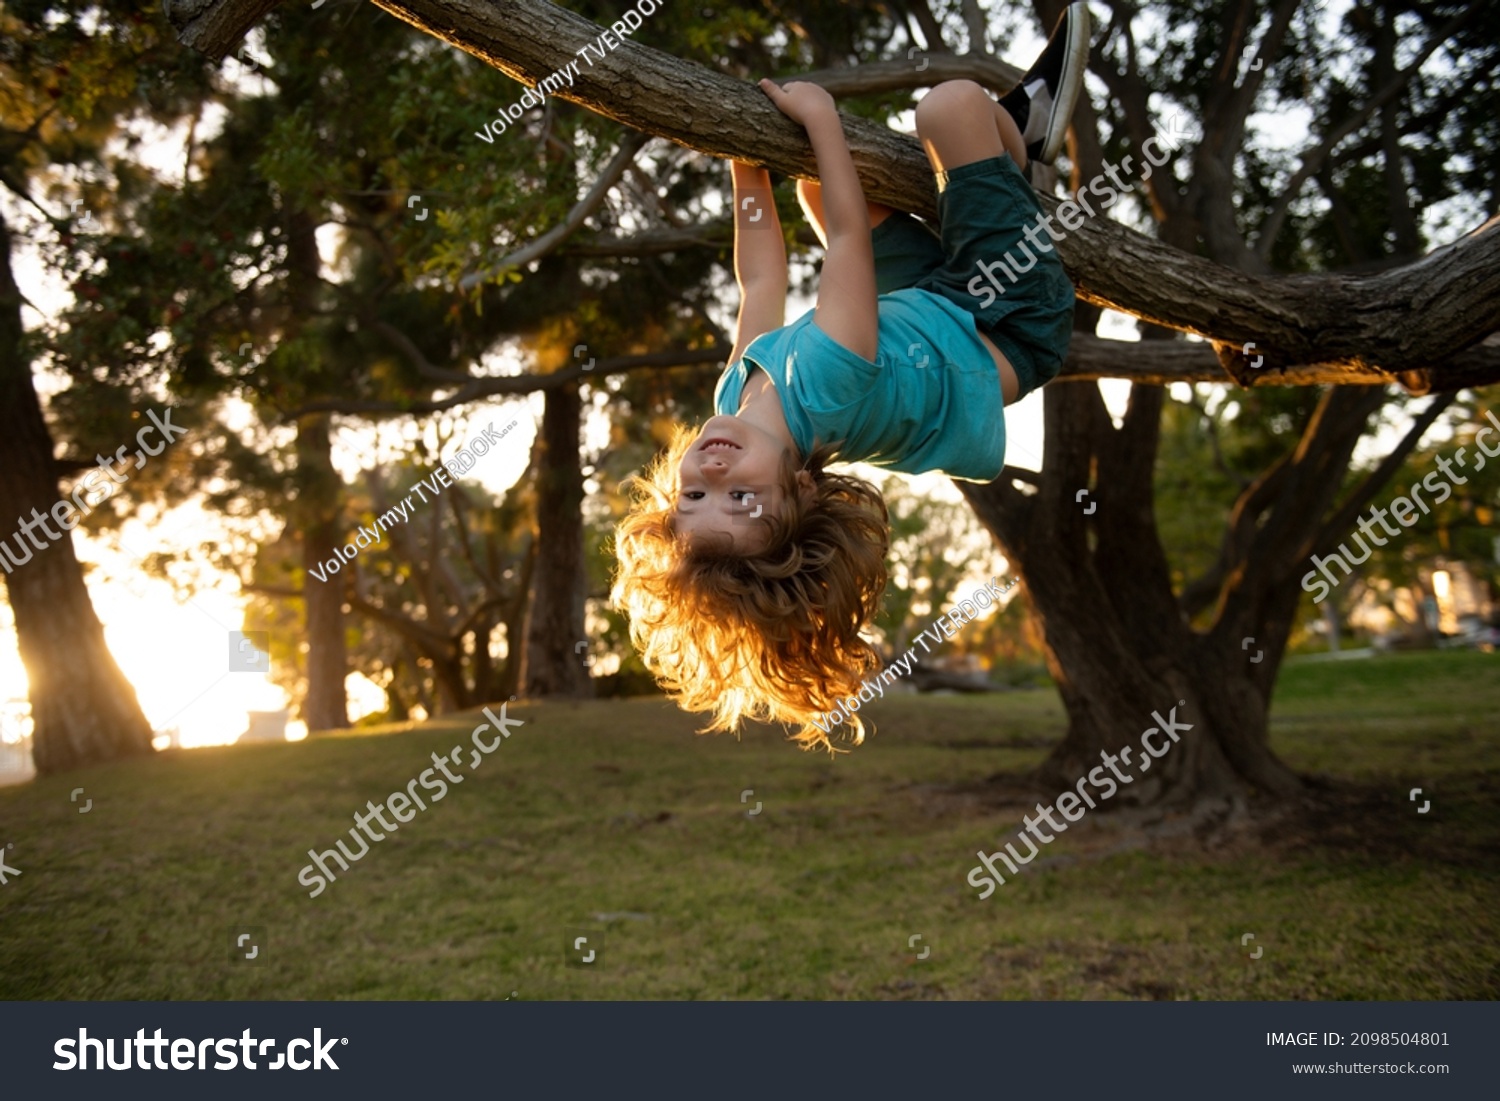 Funny child climbing a tree in the garden. Active kid playing outdoors. Portrait of cute kid boy sitting on the branch tree on sunny day. Child climbing a tree. Childhood concept. #2098504801